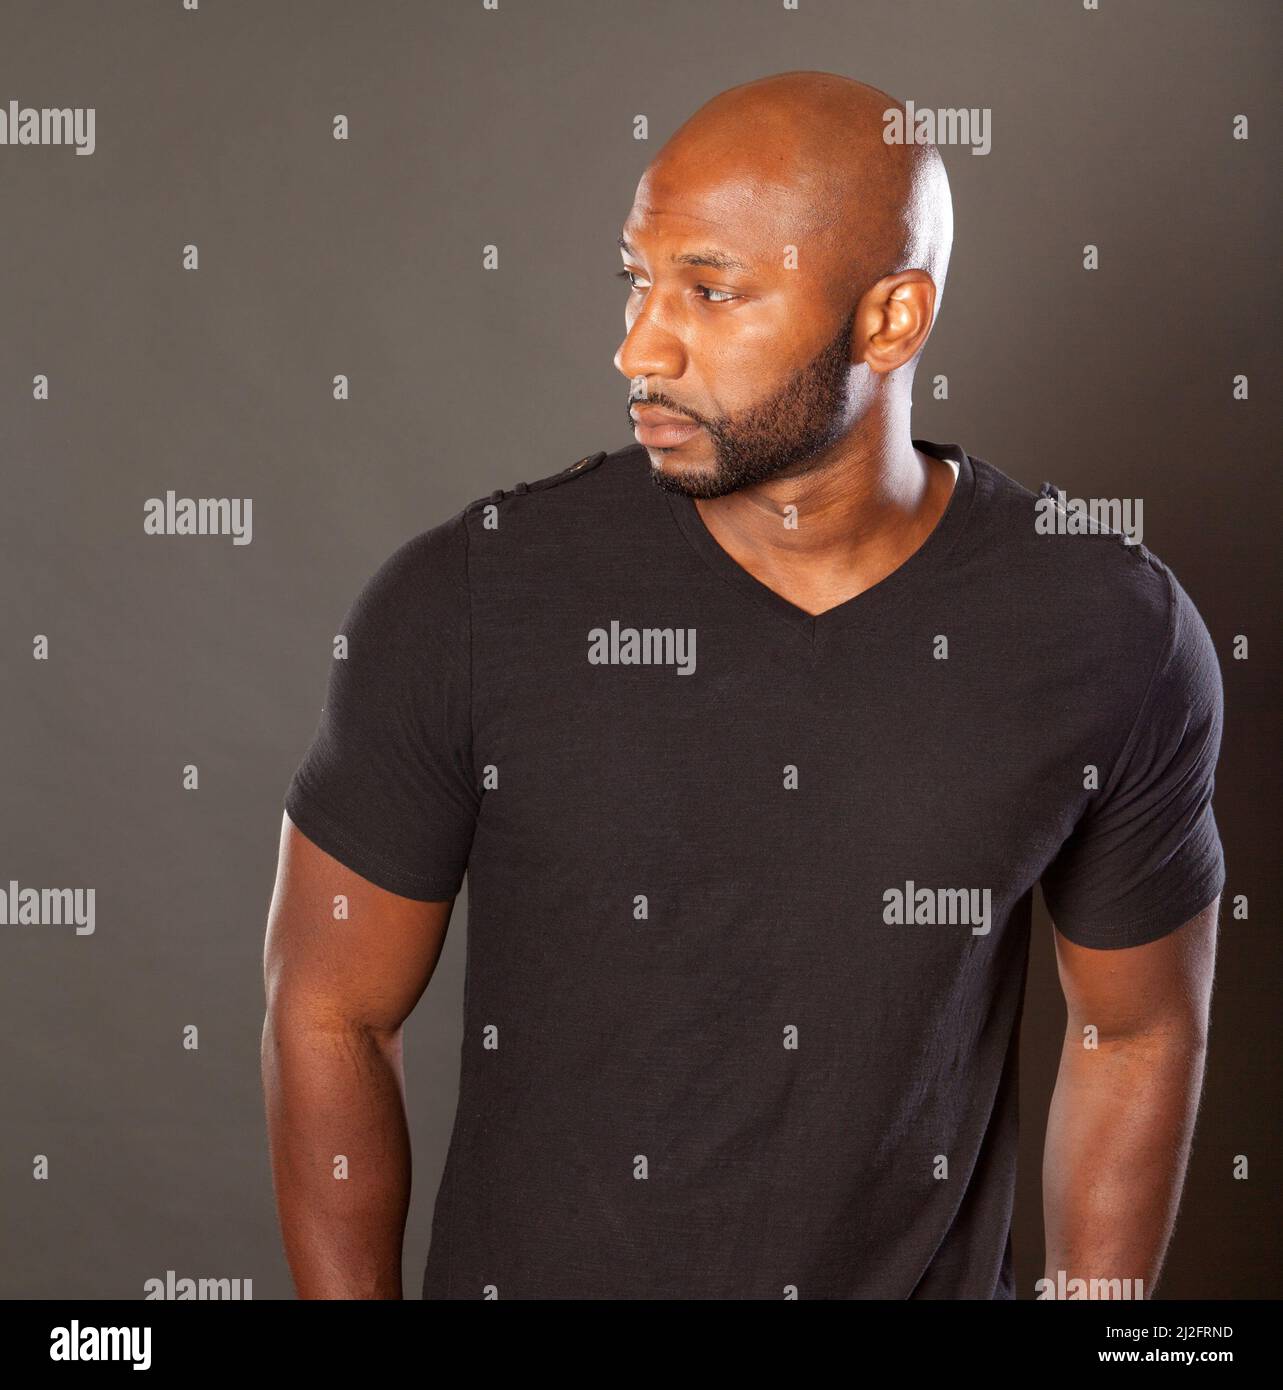 Young athletic man in a casual pose a dark t-shirt looking at the camera with a sesios attitude expression looking to the side Stock Photo Alamy